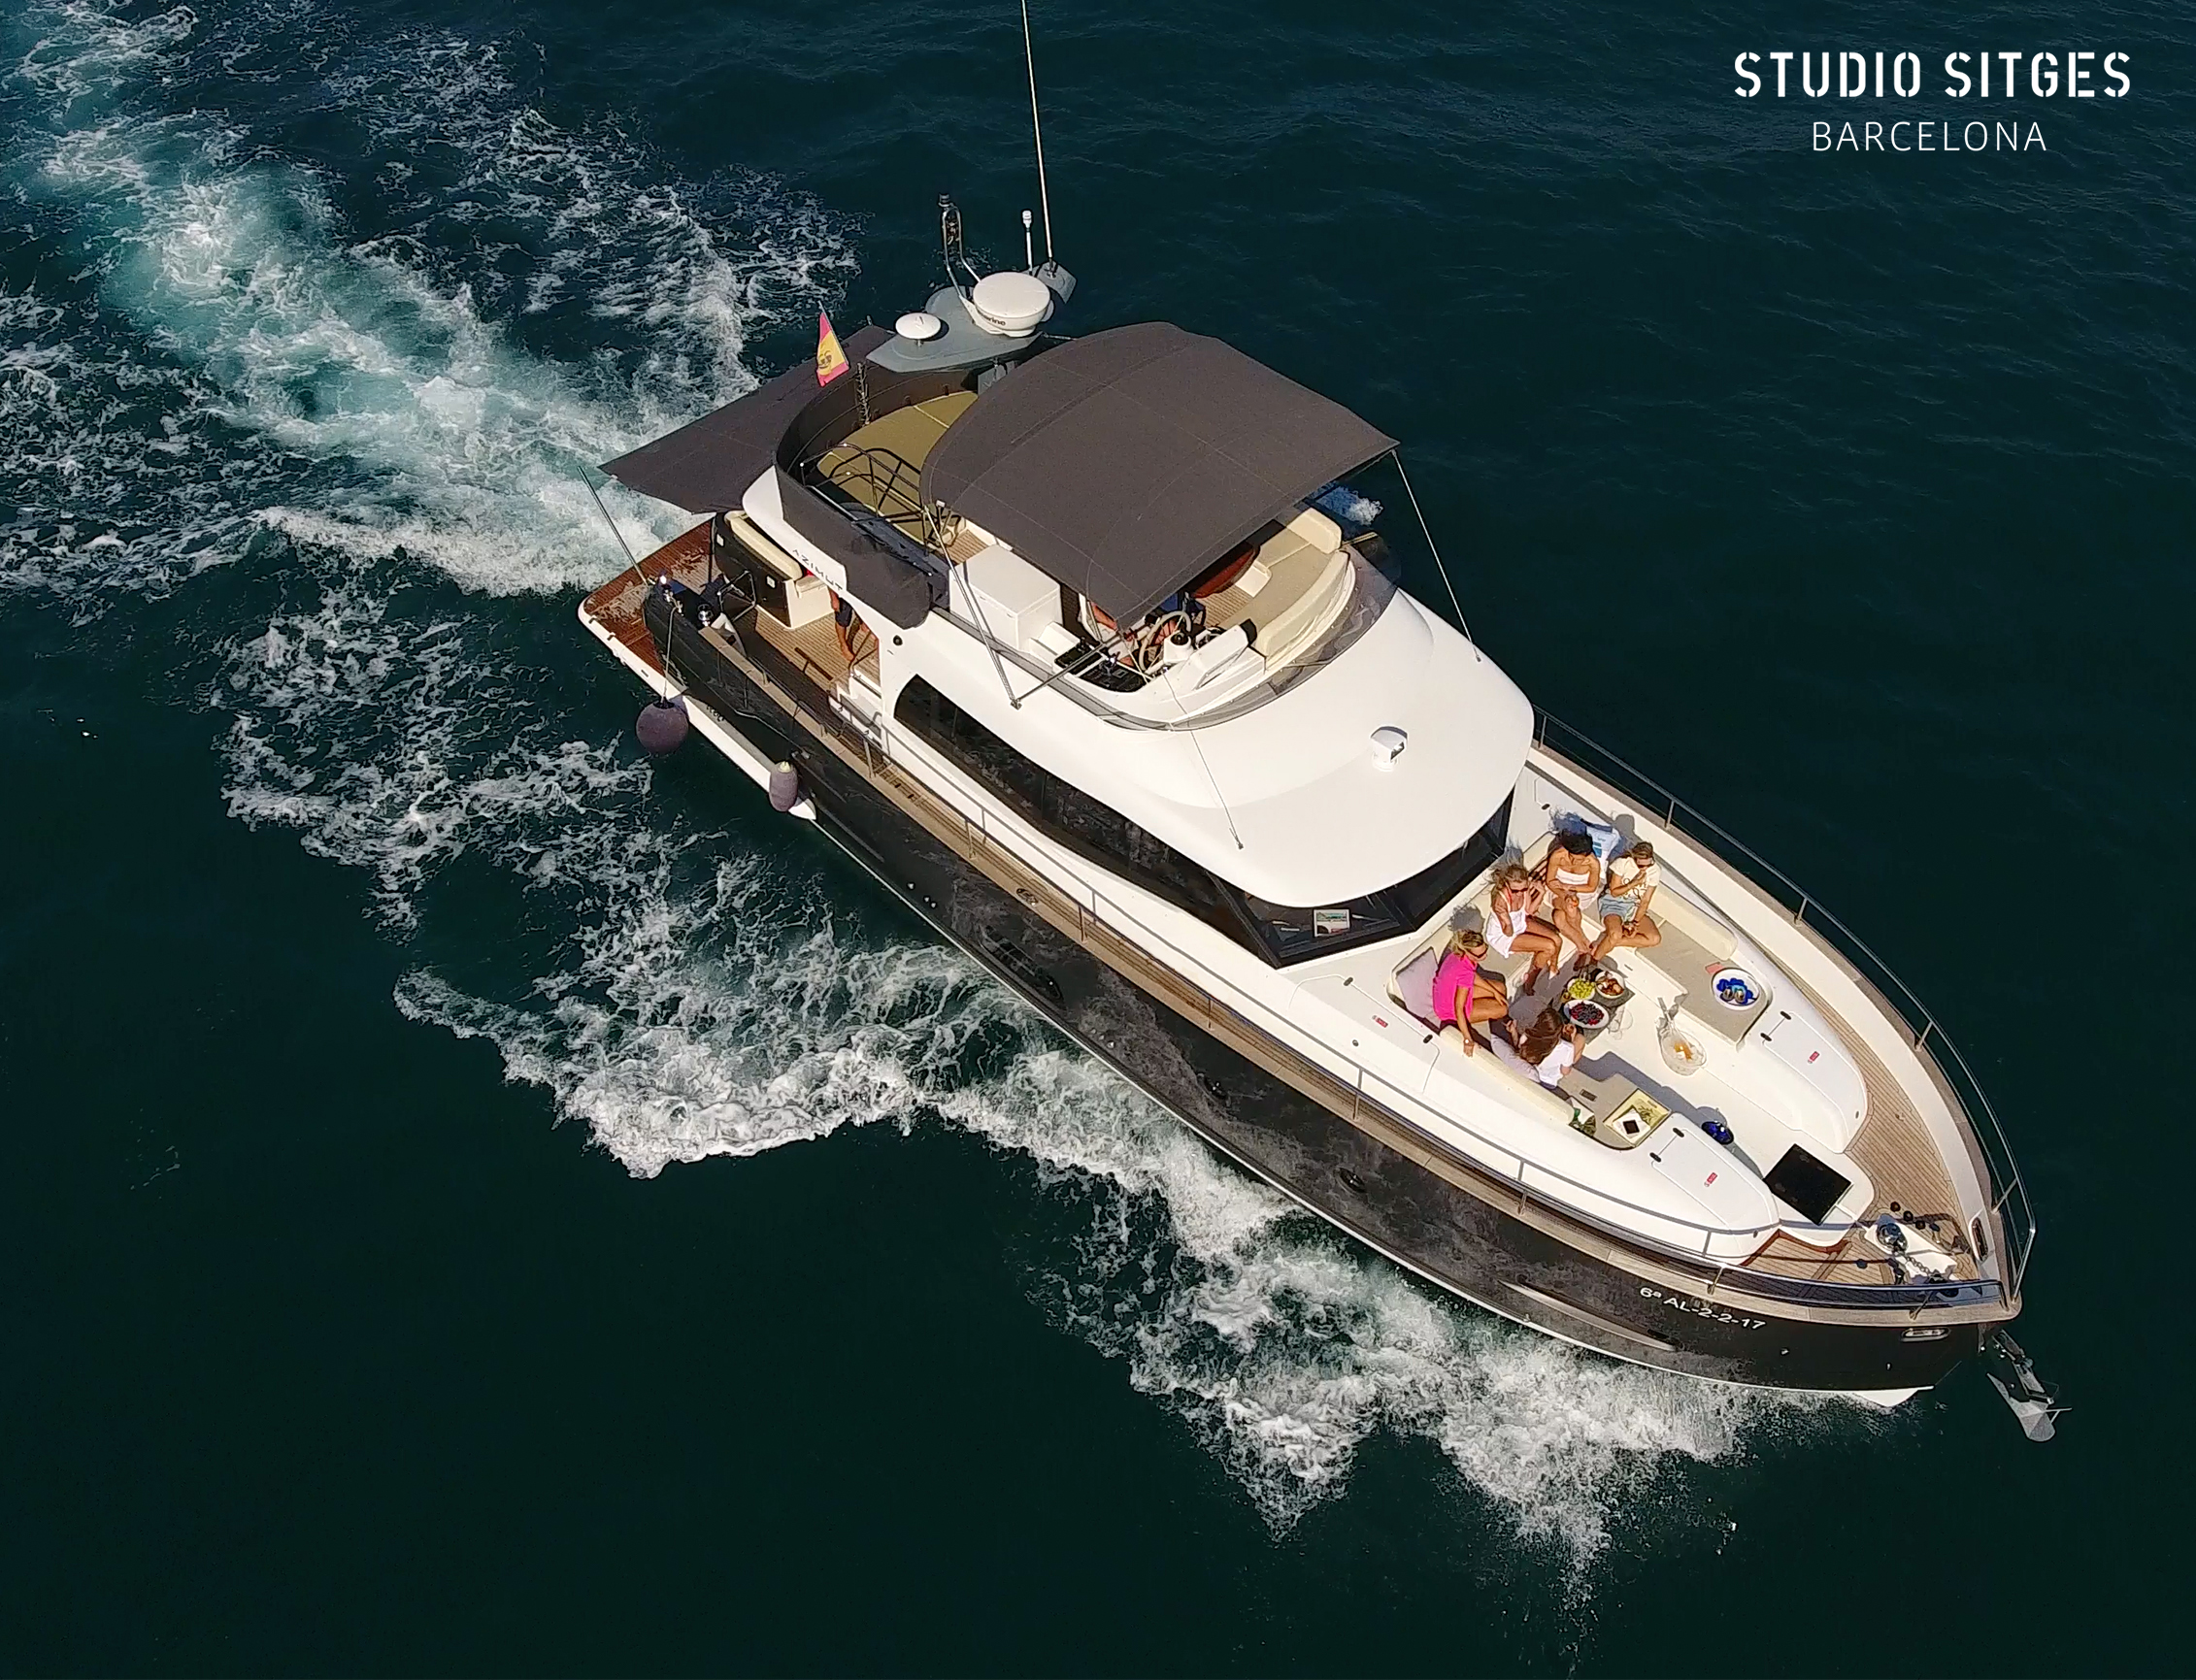 The Azimut Magellano 53 motor yacht Peluni now available for charter at Studio Sitges.